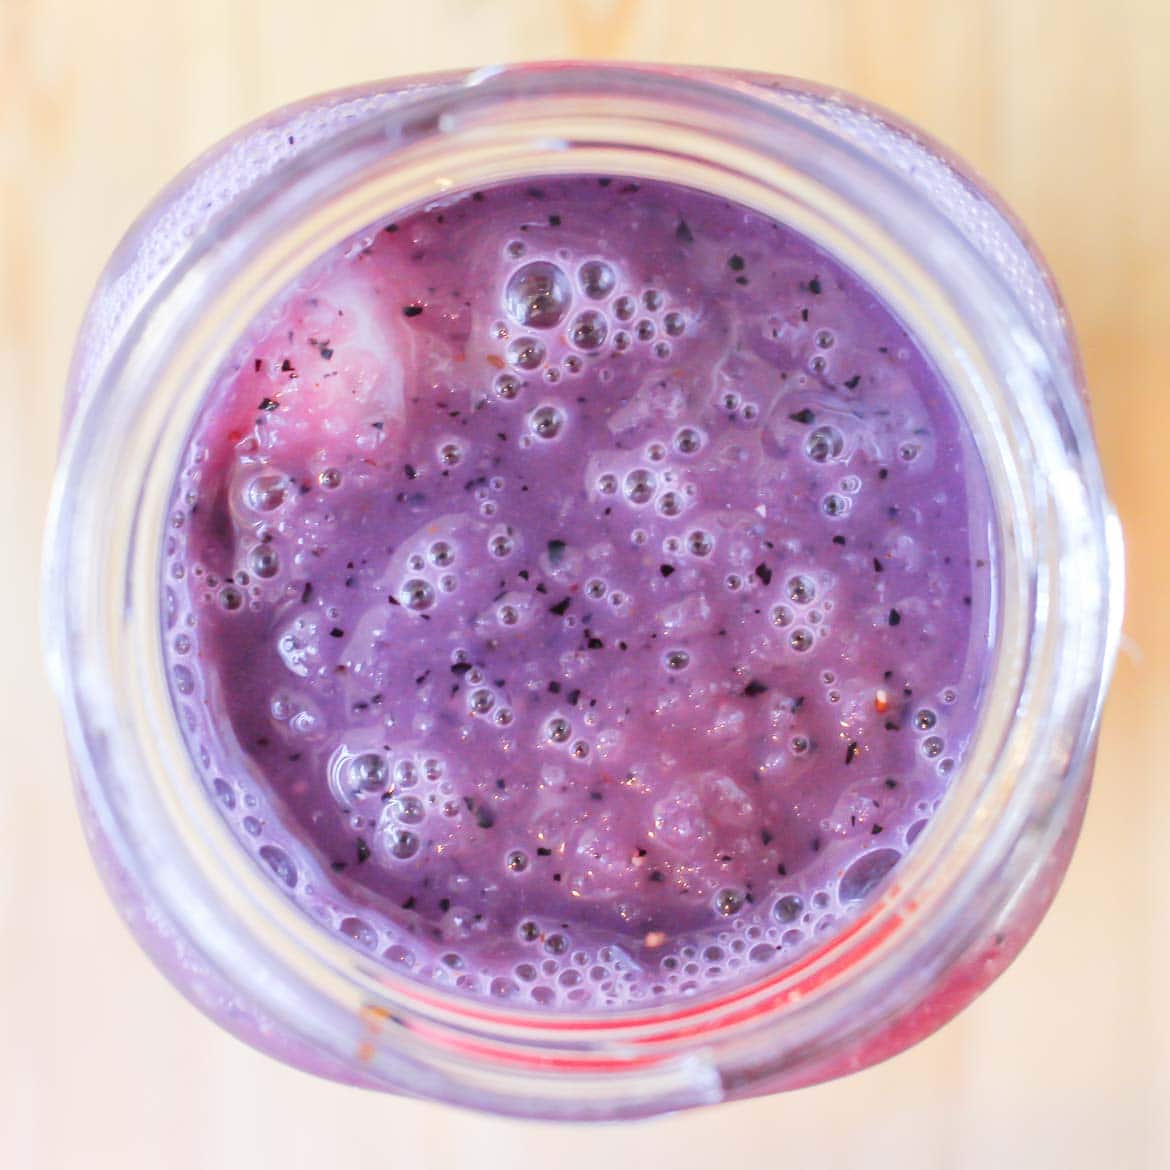 Almond milk berry smoothie with strawberries, blueberries and bananas